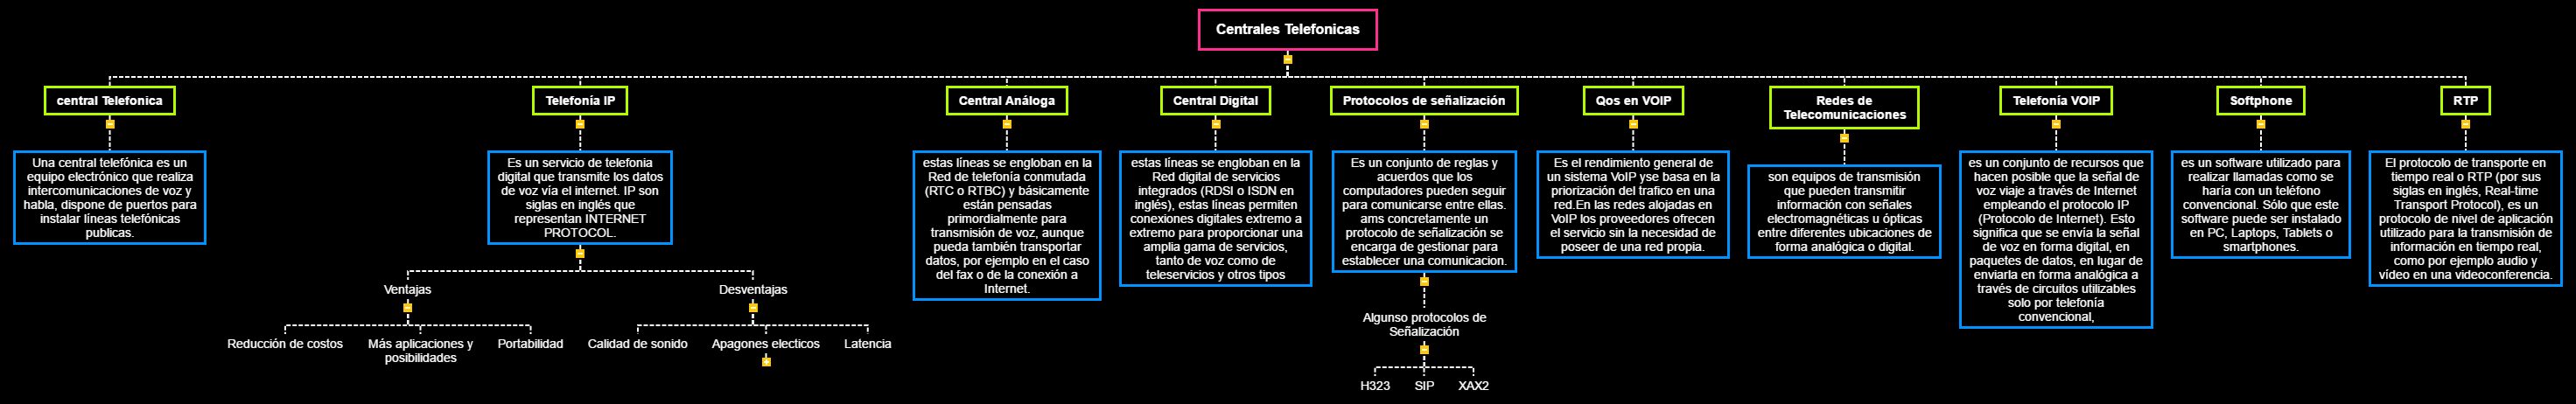 central telefonica